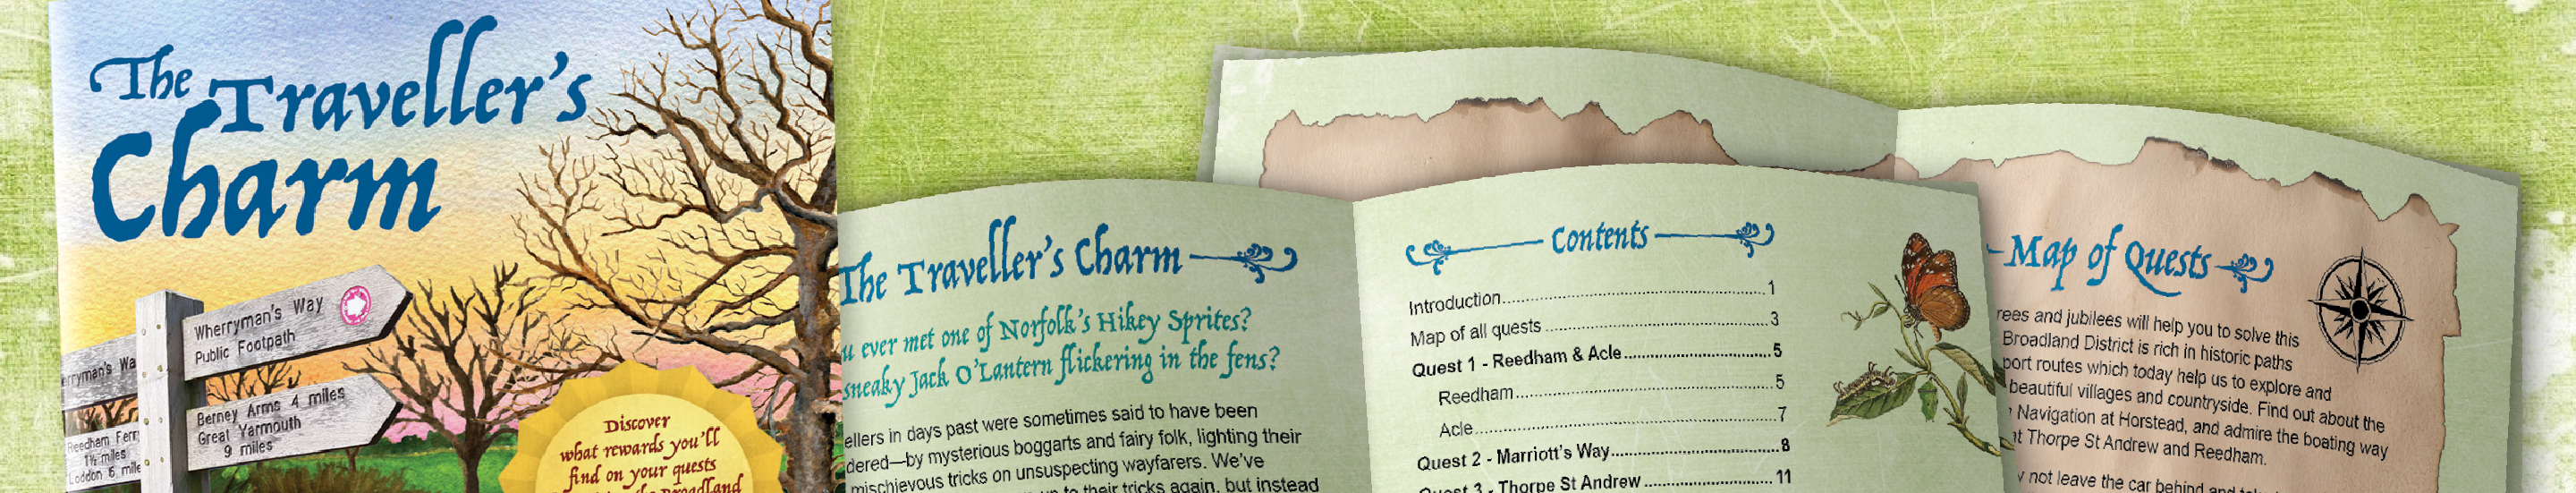 Graphic showing the travellers charm trail booklet.